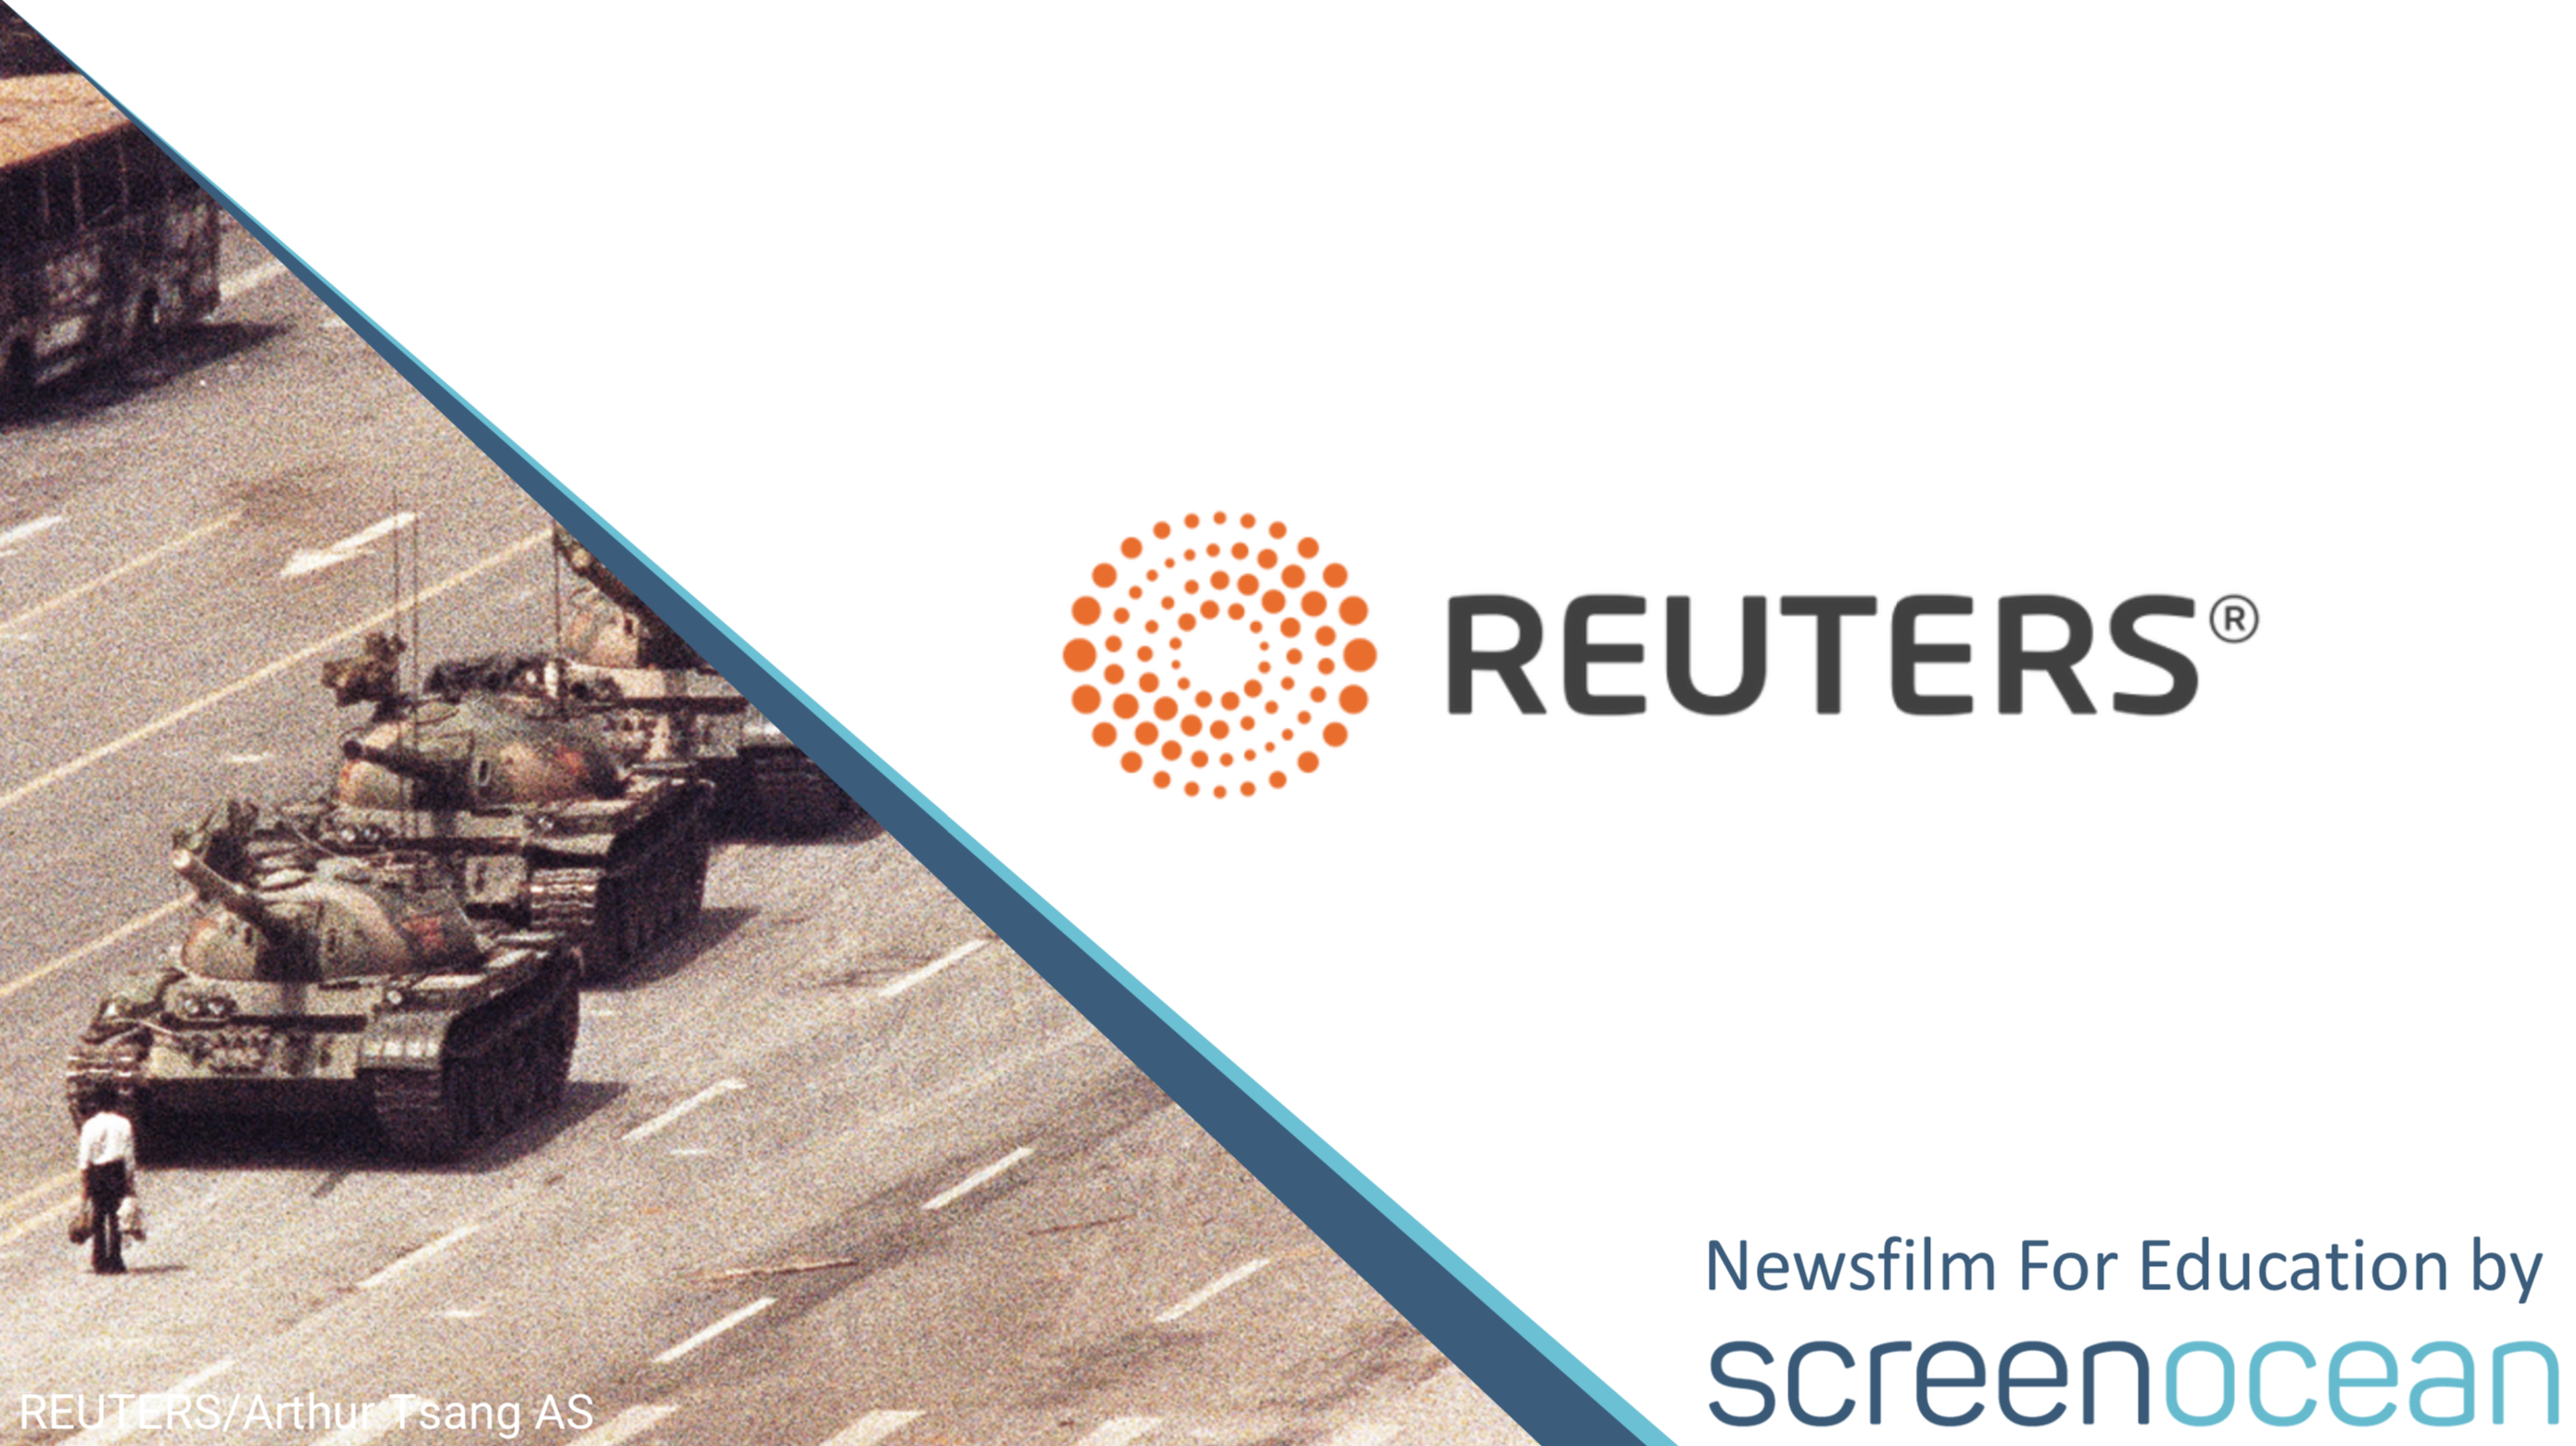 SCREENOCEAN ARE PROUD TO LAUNCH NEWSFILM FOR EDUCATION